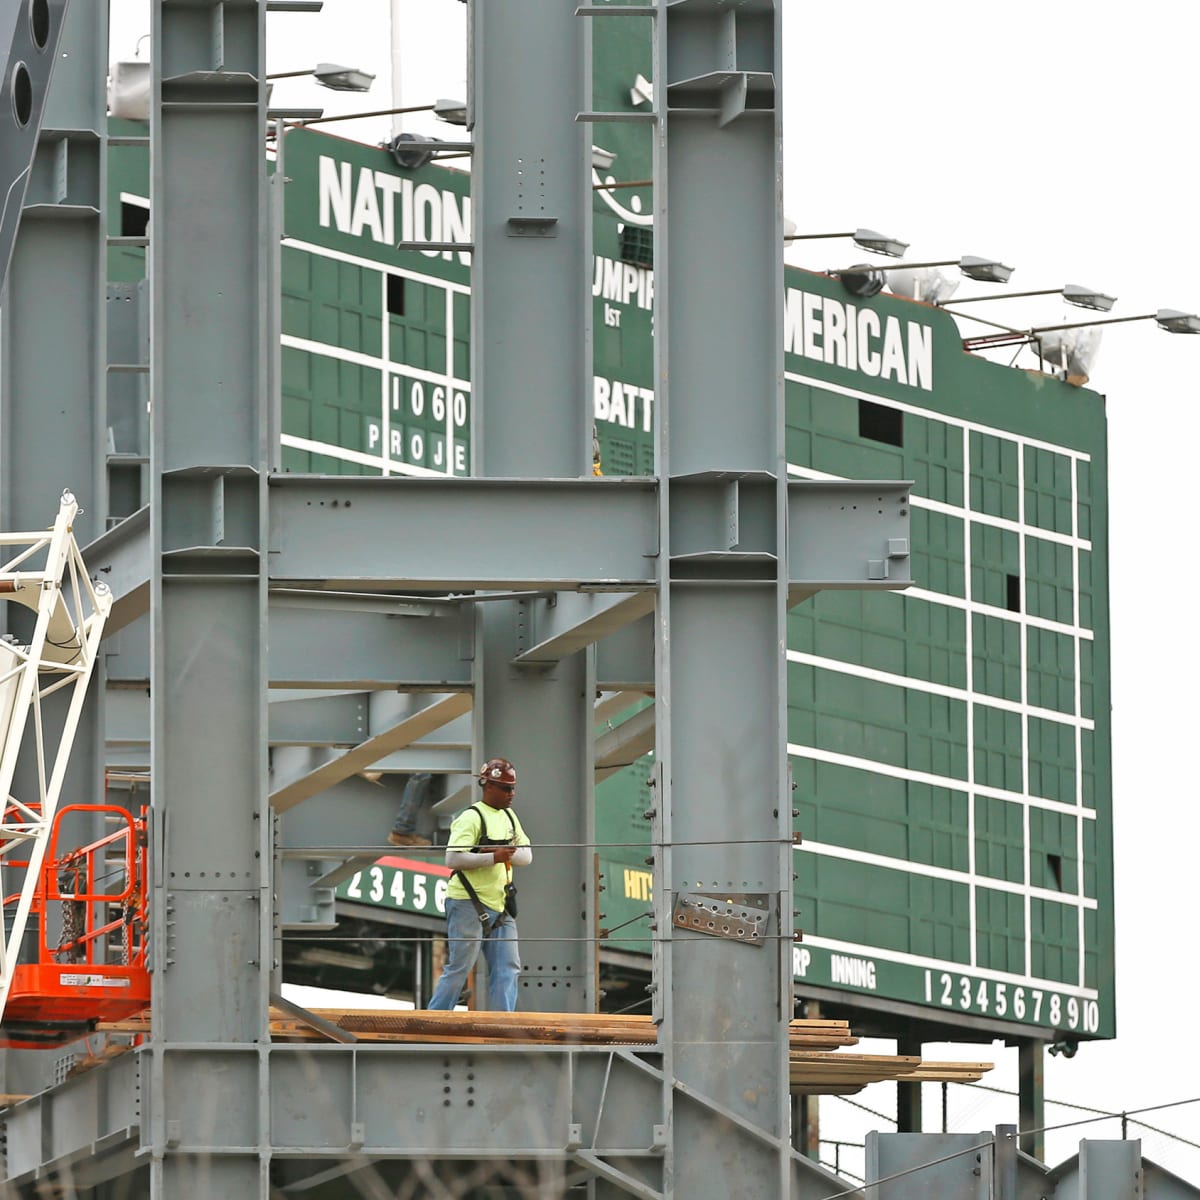 Update on Cubs trade and the controversial Wrigley Field renovations